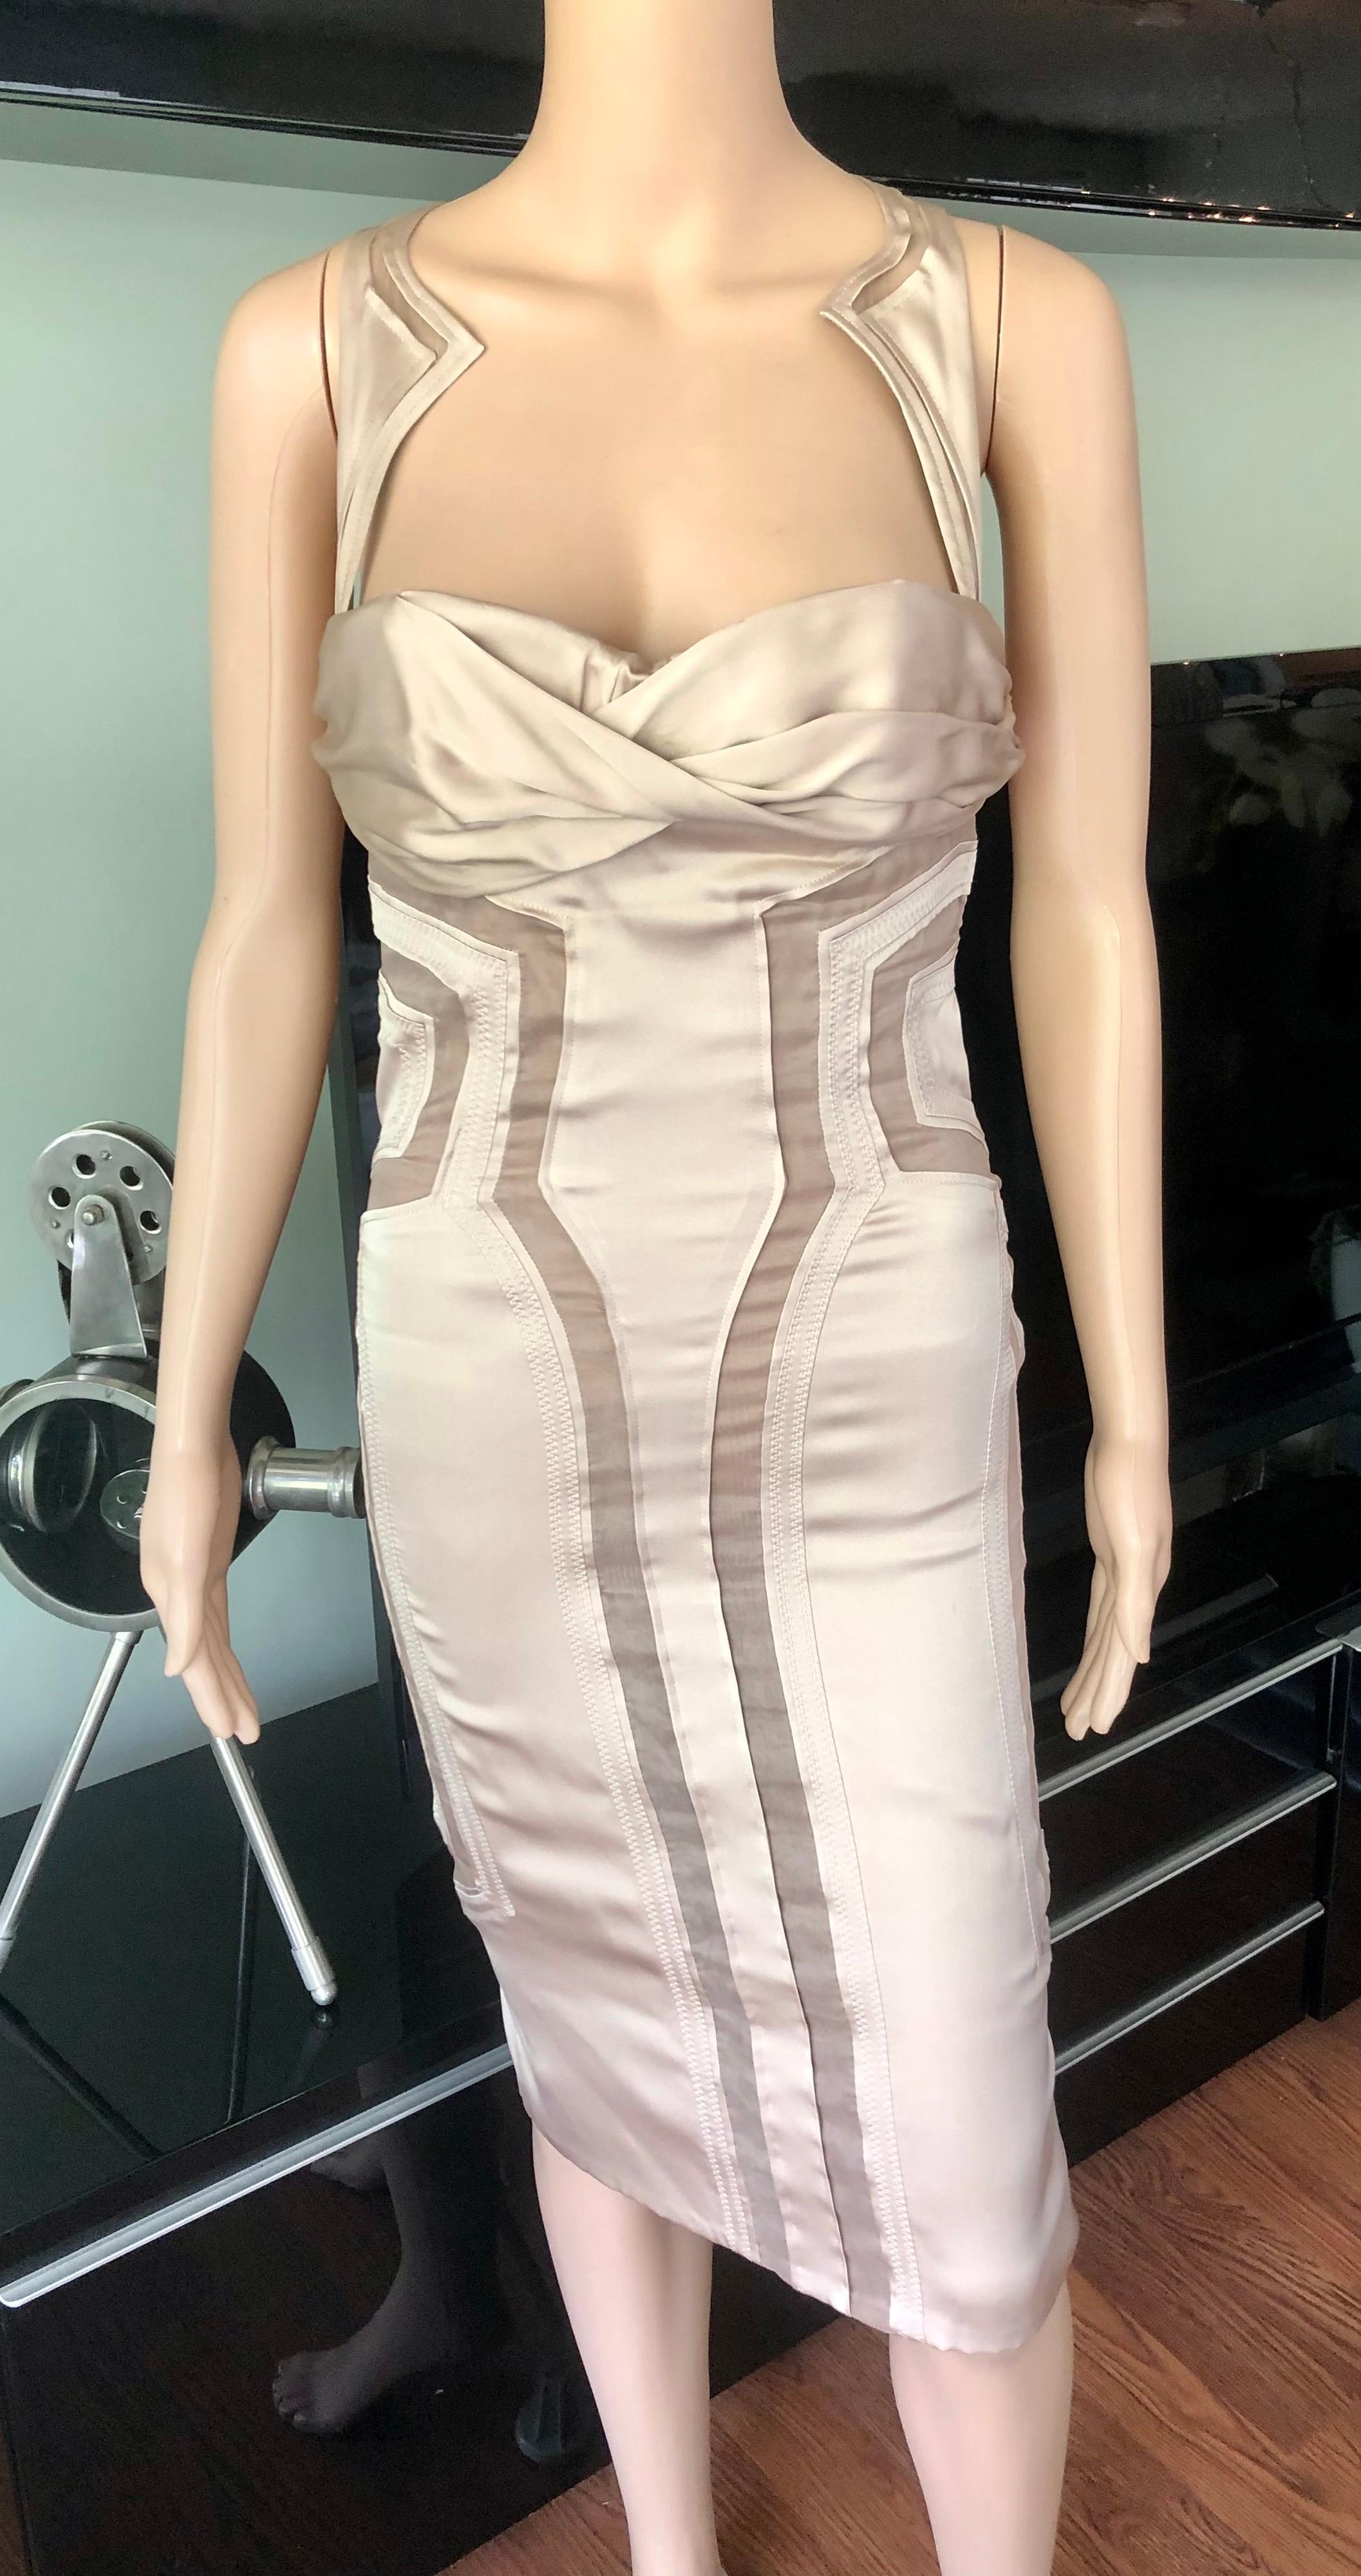 Gucci S/S 2005 Runway Bustier Open Cutout Back Silk Dress In Good Condition For Sale In Naples, FL